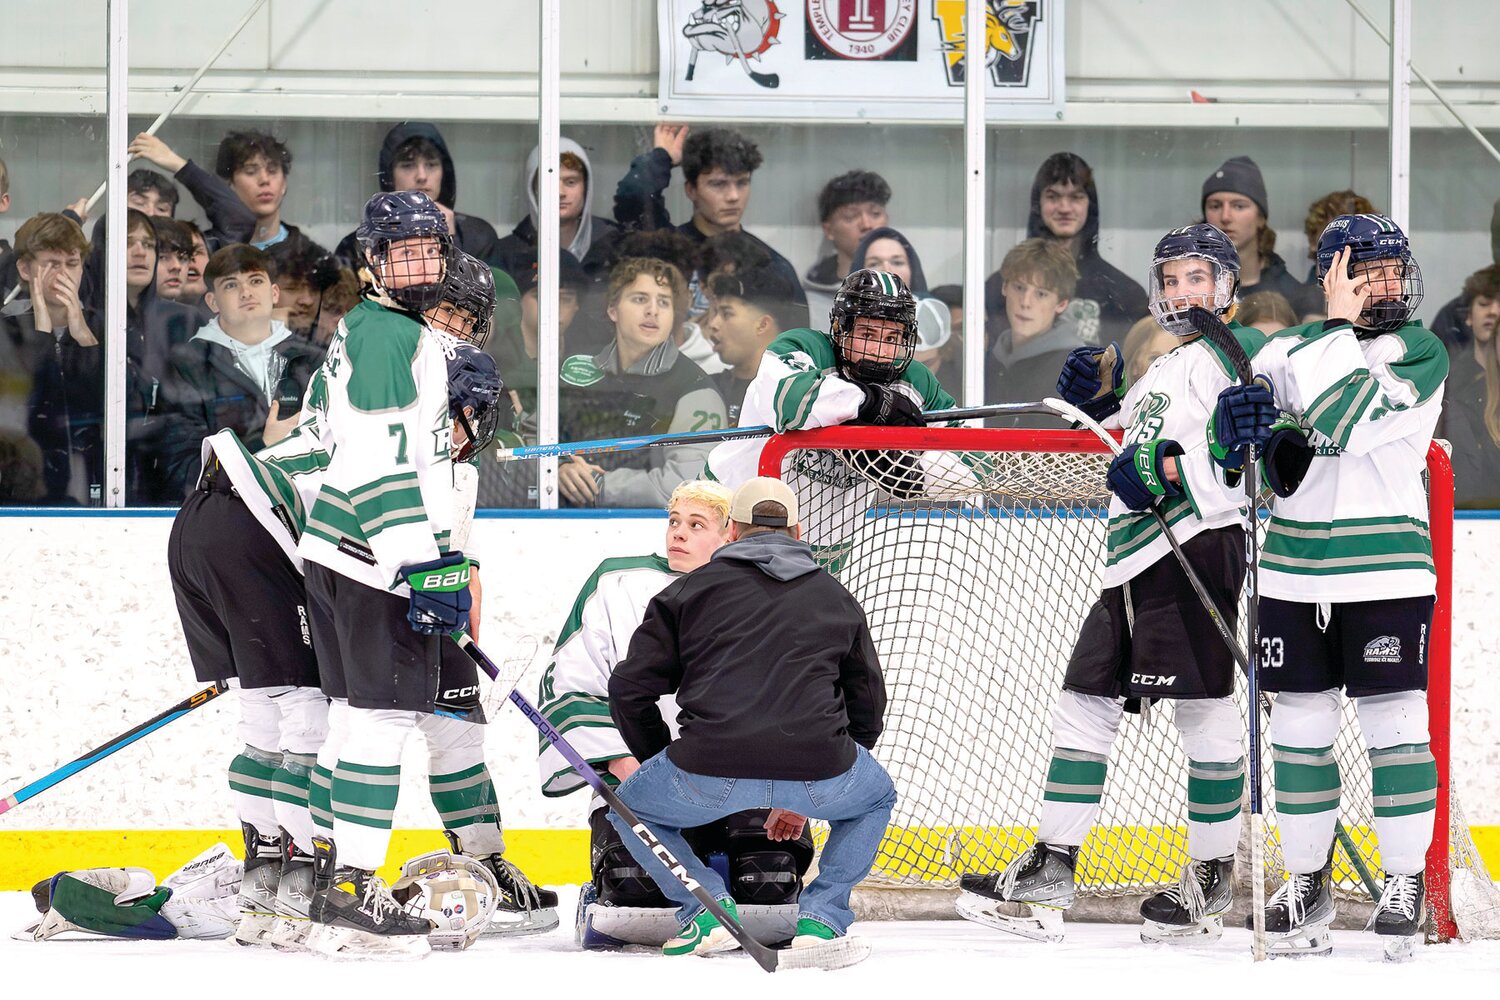 Pennridge looks to the bench for answers after goalie Jacob Winton recovers from a crash in front of the net in the third period of last Thursday’s SHSHL final and the score 5-2 at the time.